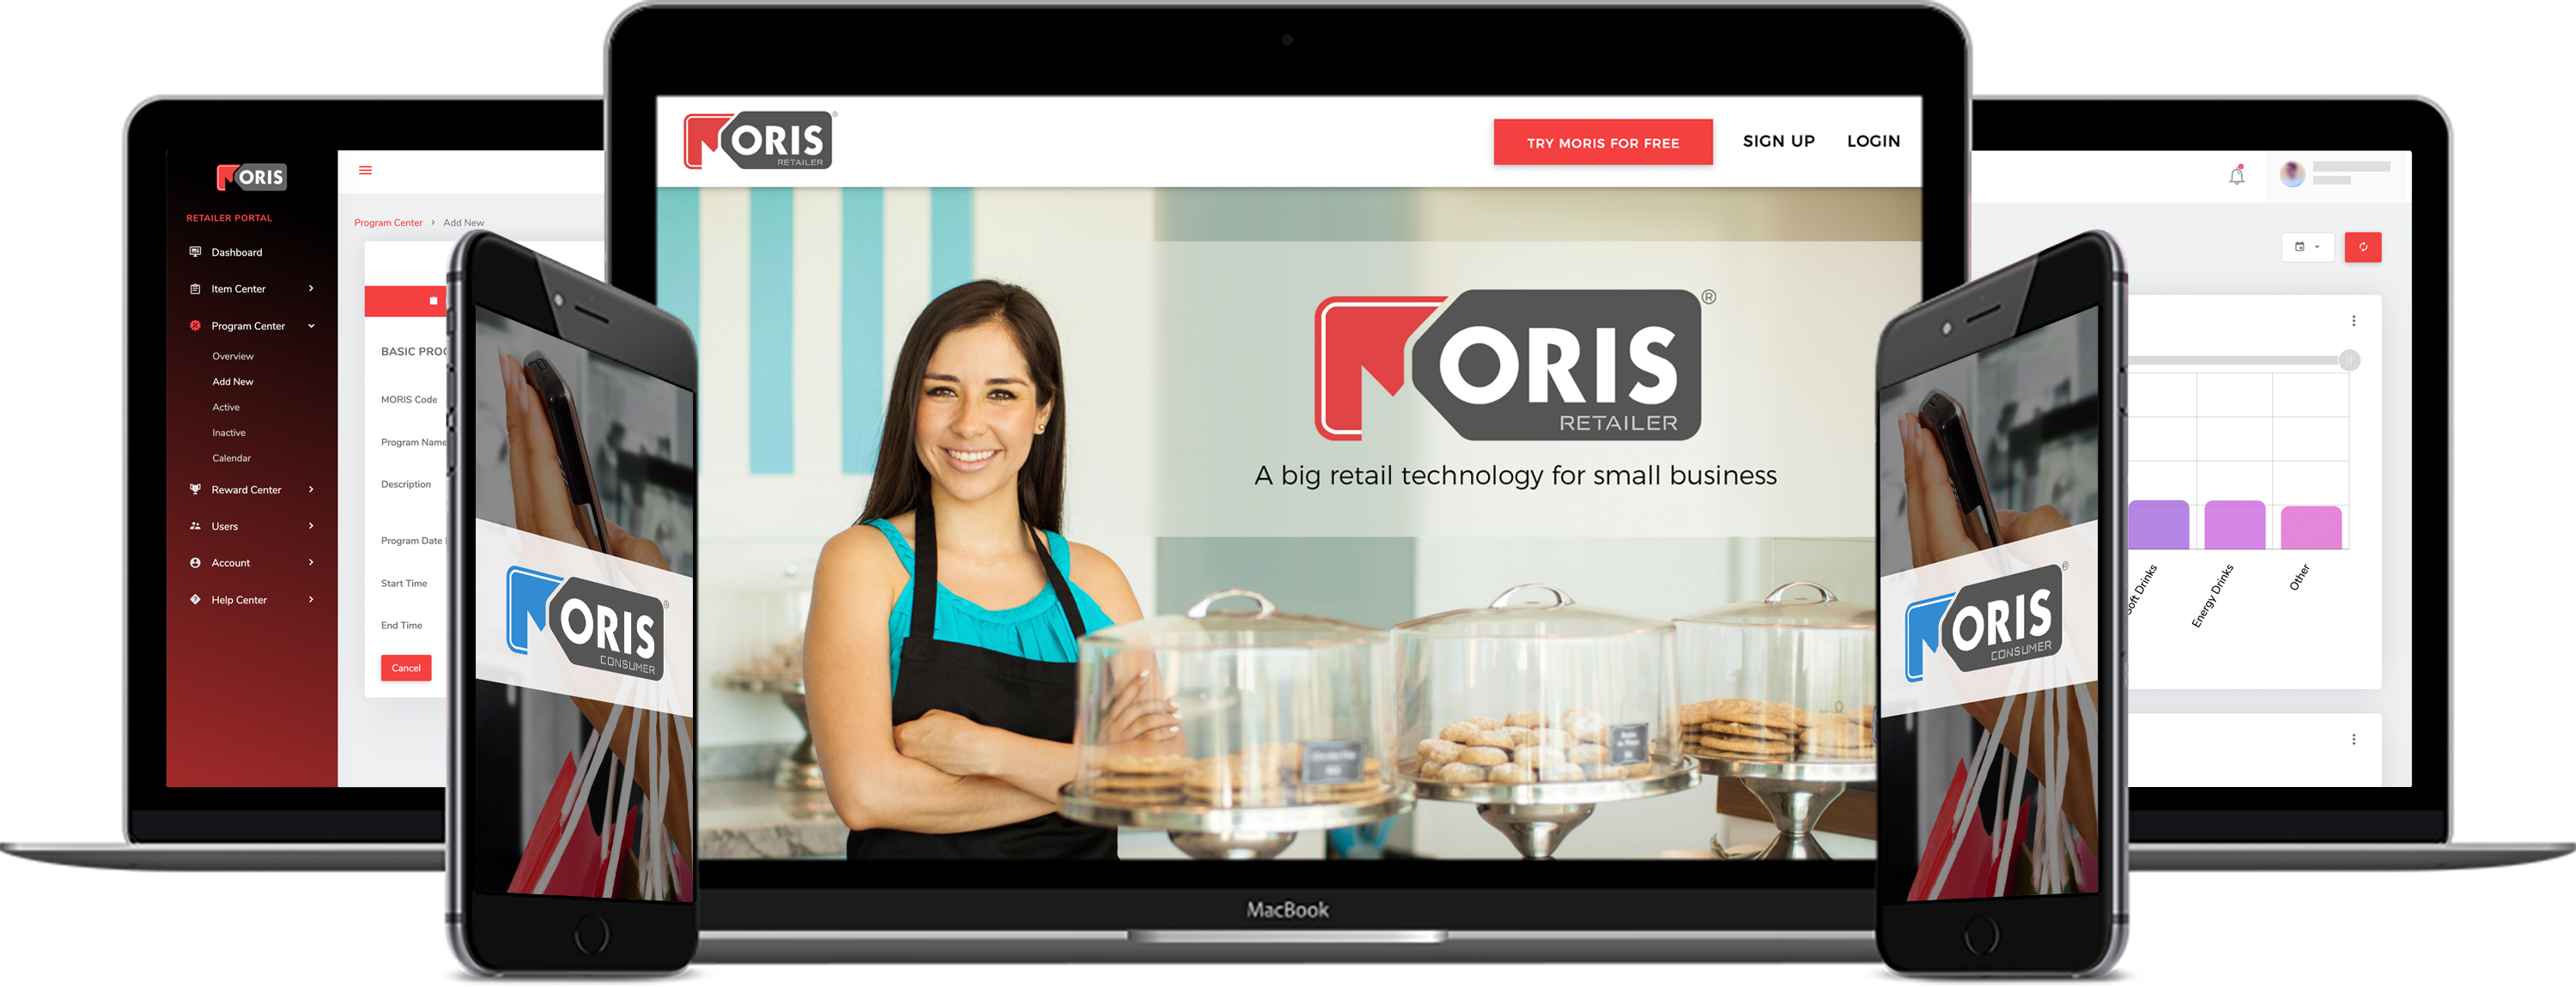 Laptops and phones with MORIS applications